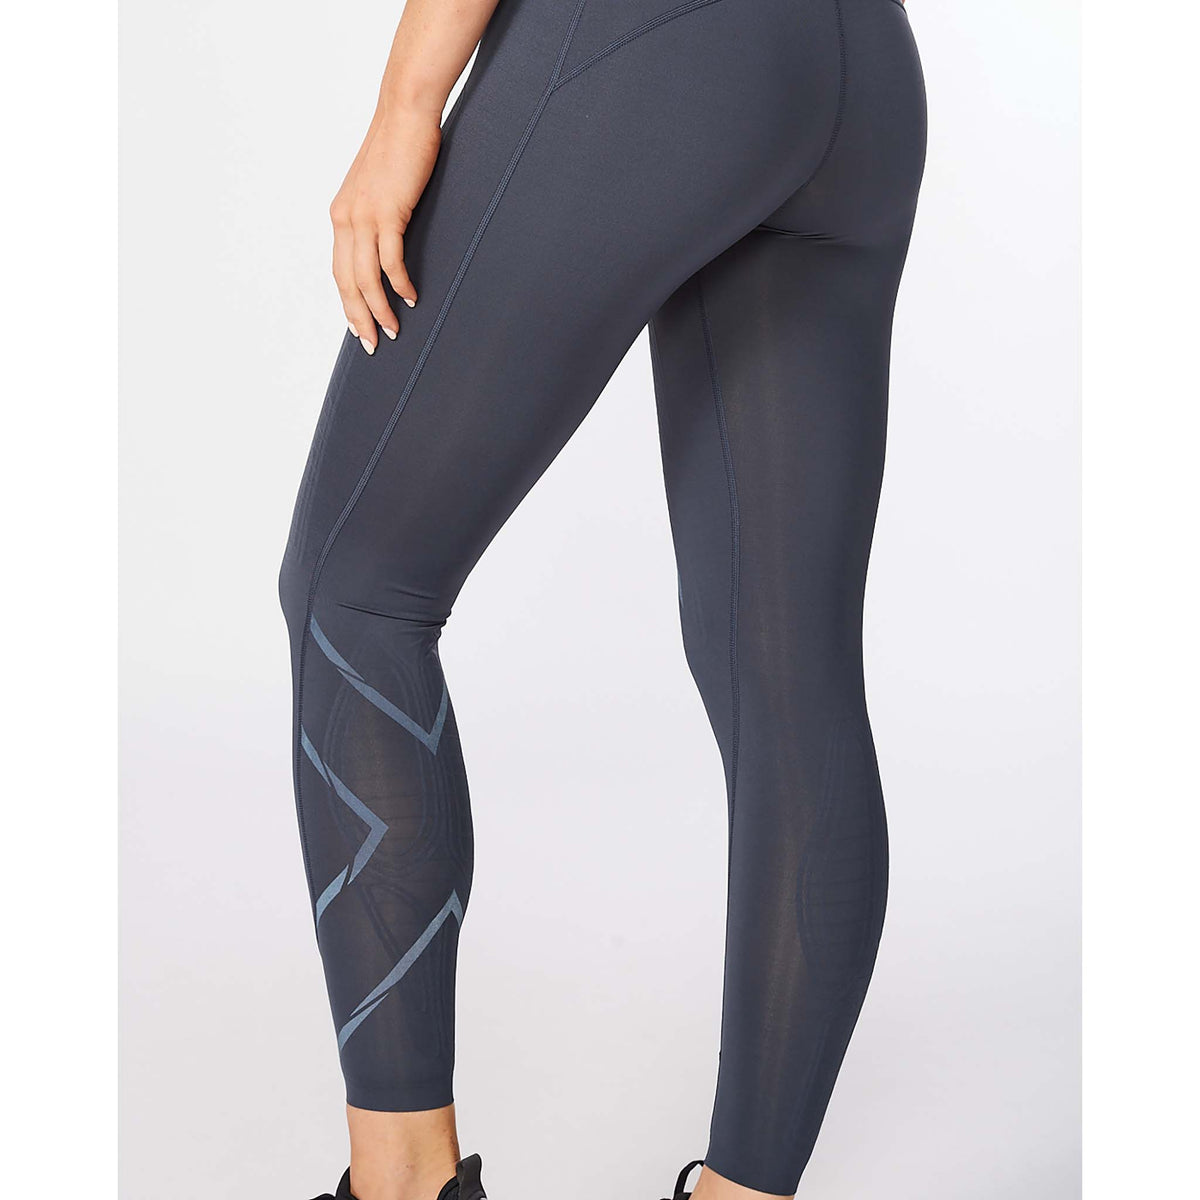 2XU Light Speed Mid-Rise Compression Tights legging compressif india ink femme jambe